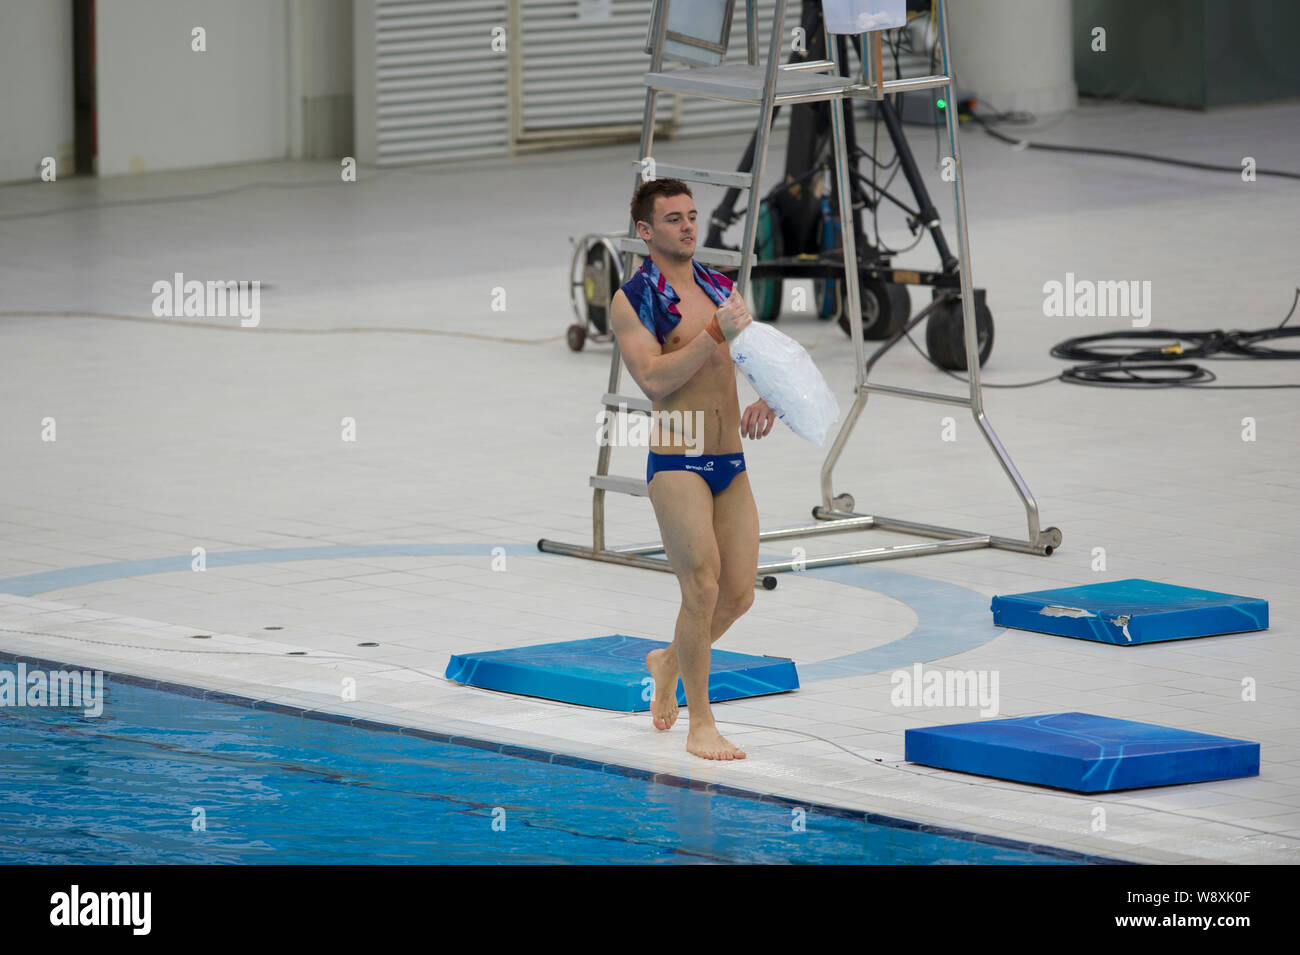 English diver Tomas Daley holds an ice bag during a training session of the FINA/NVC Diving World Series 2014 at the National Aquatics Center, also kn Stock Photo